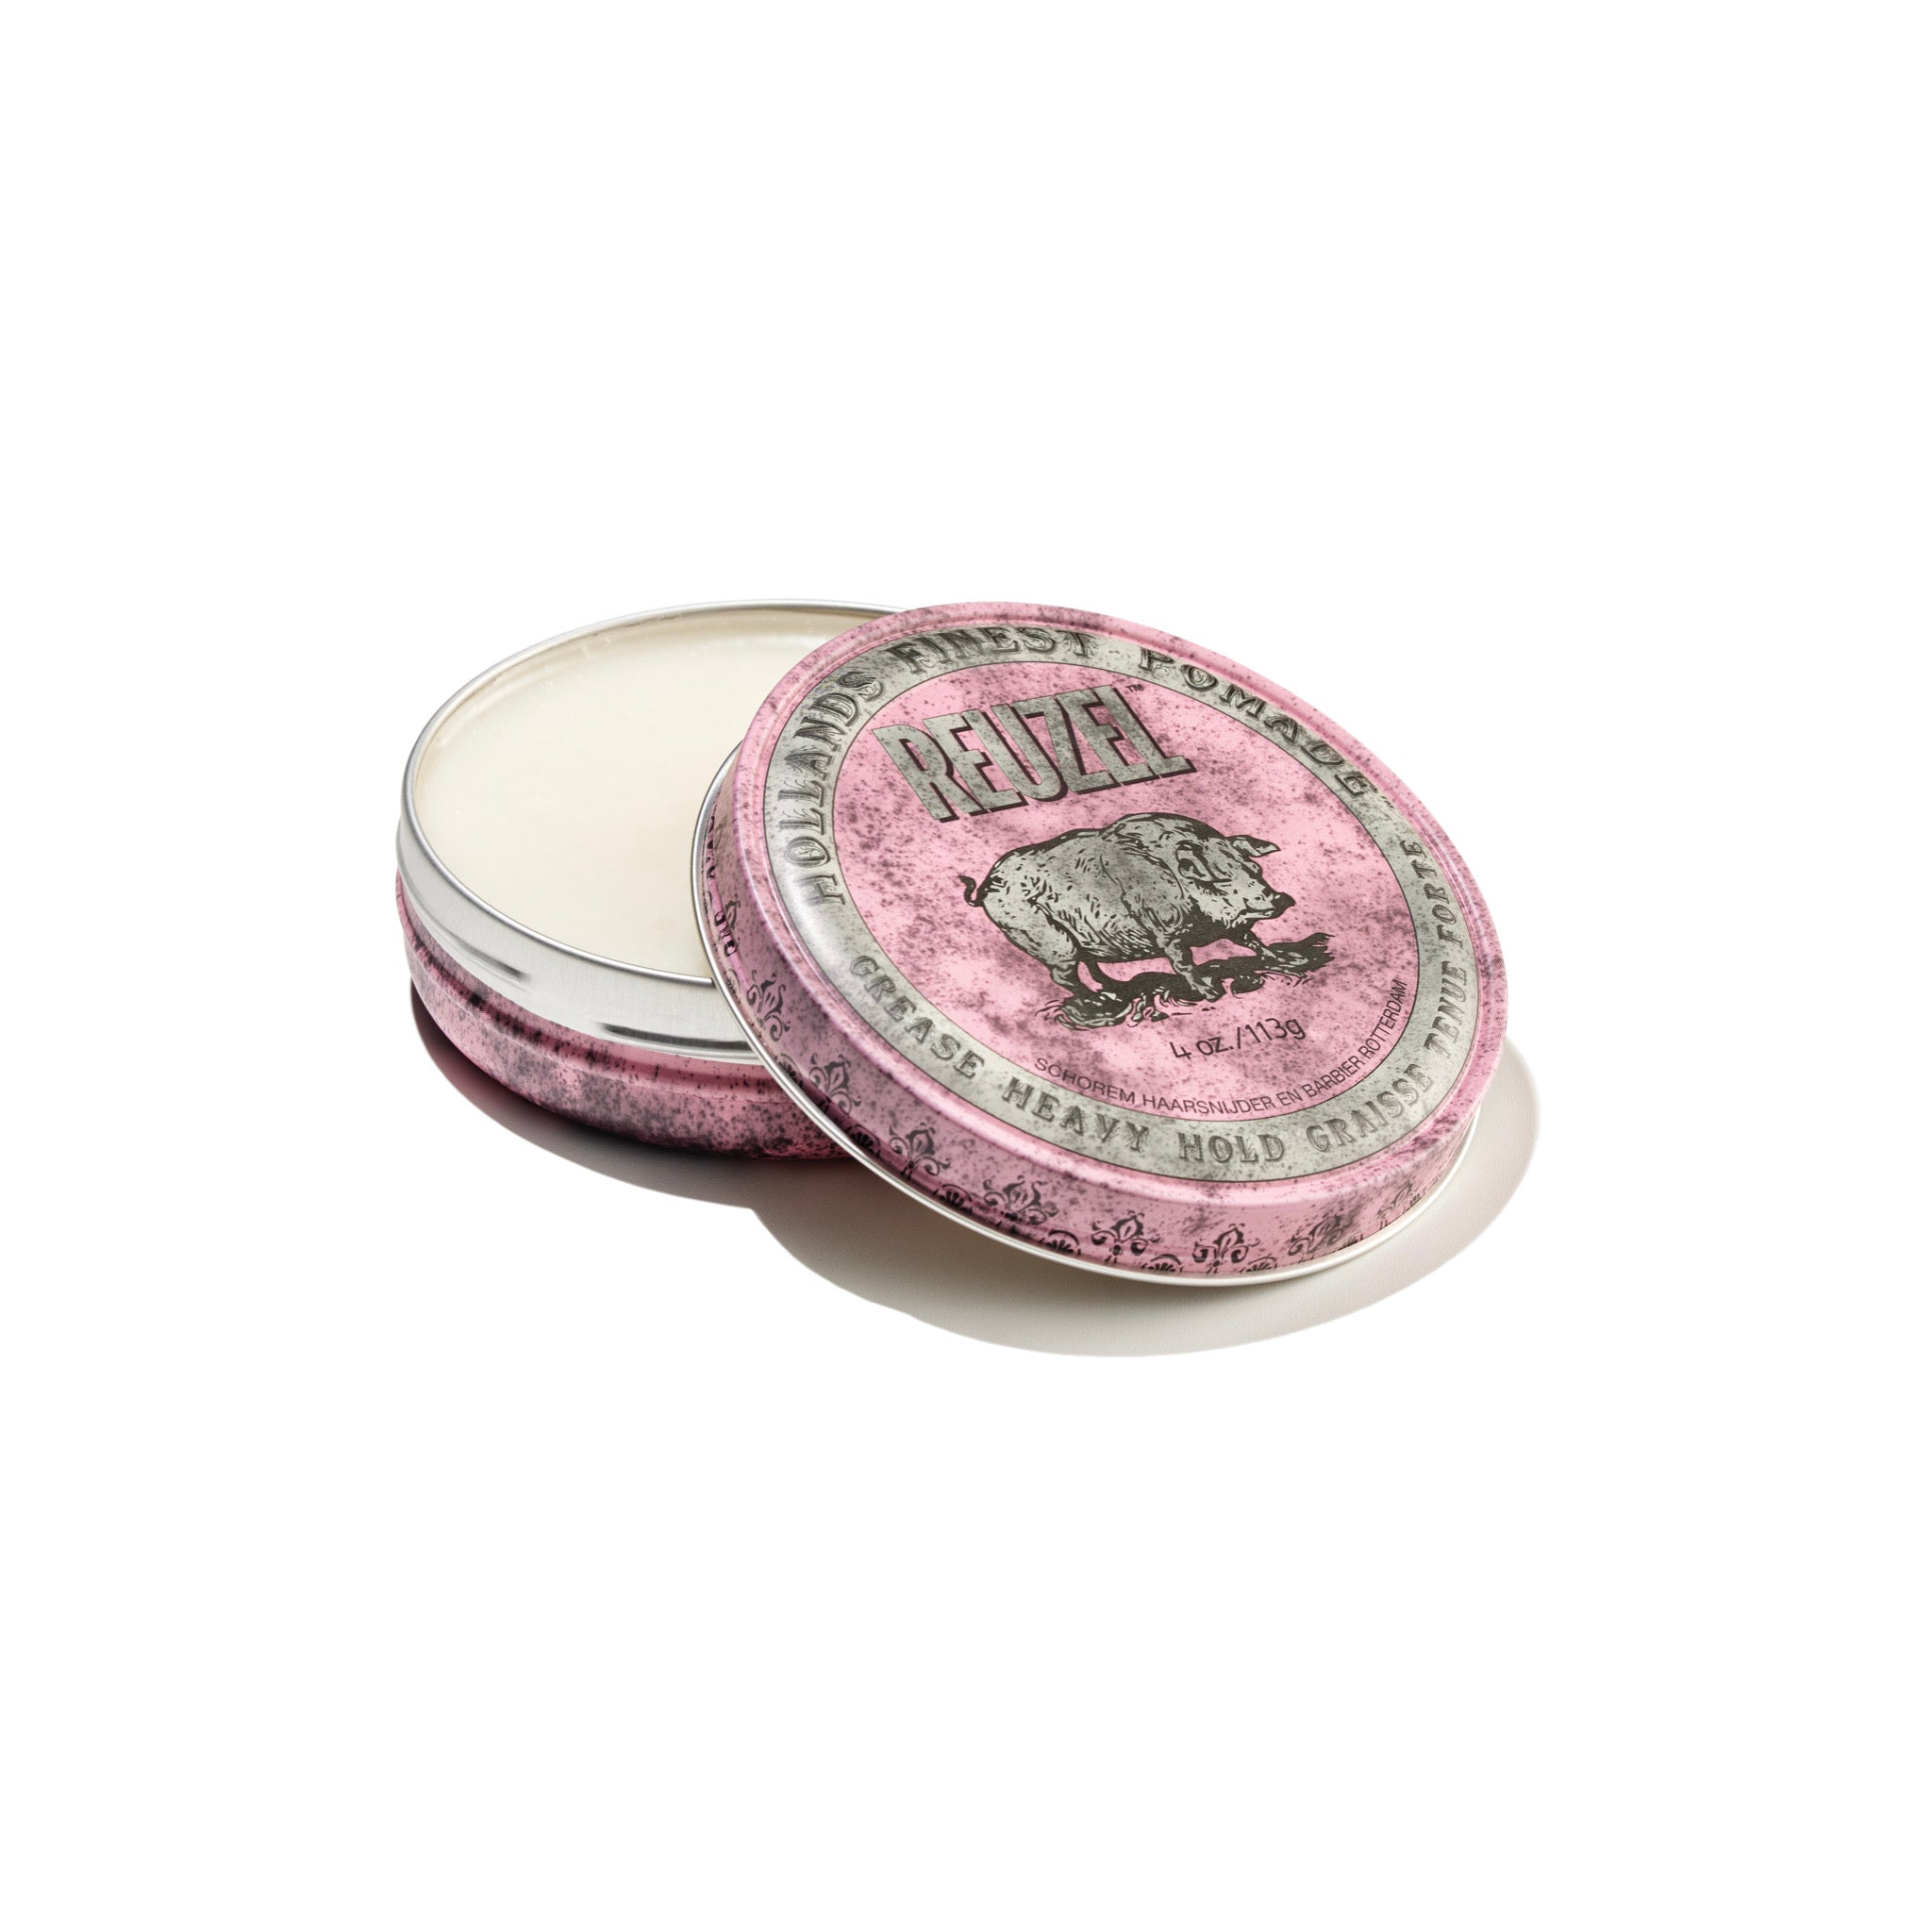 PINK POMADE GREASE